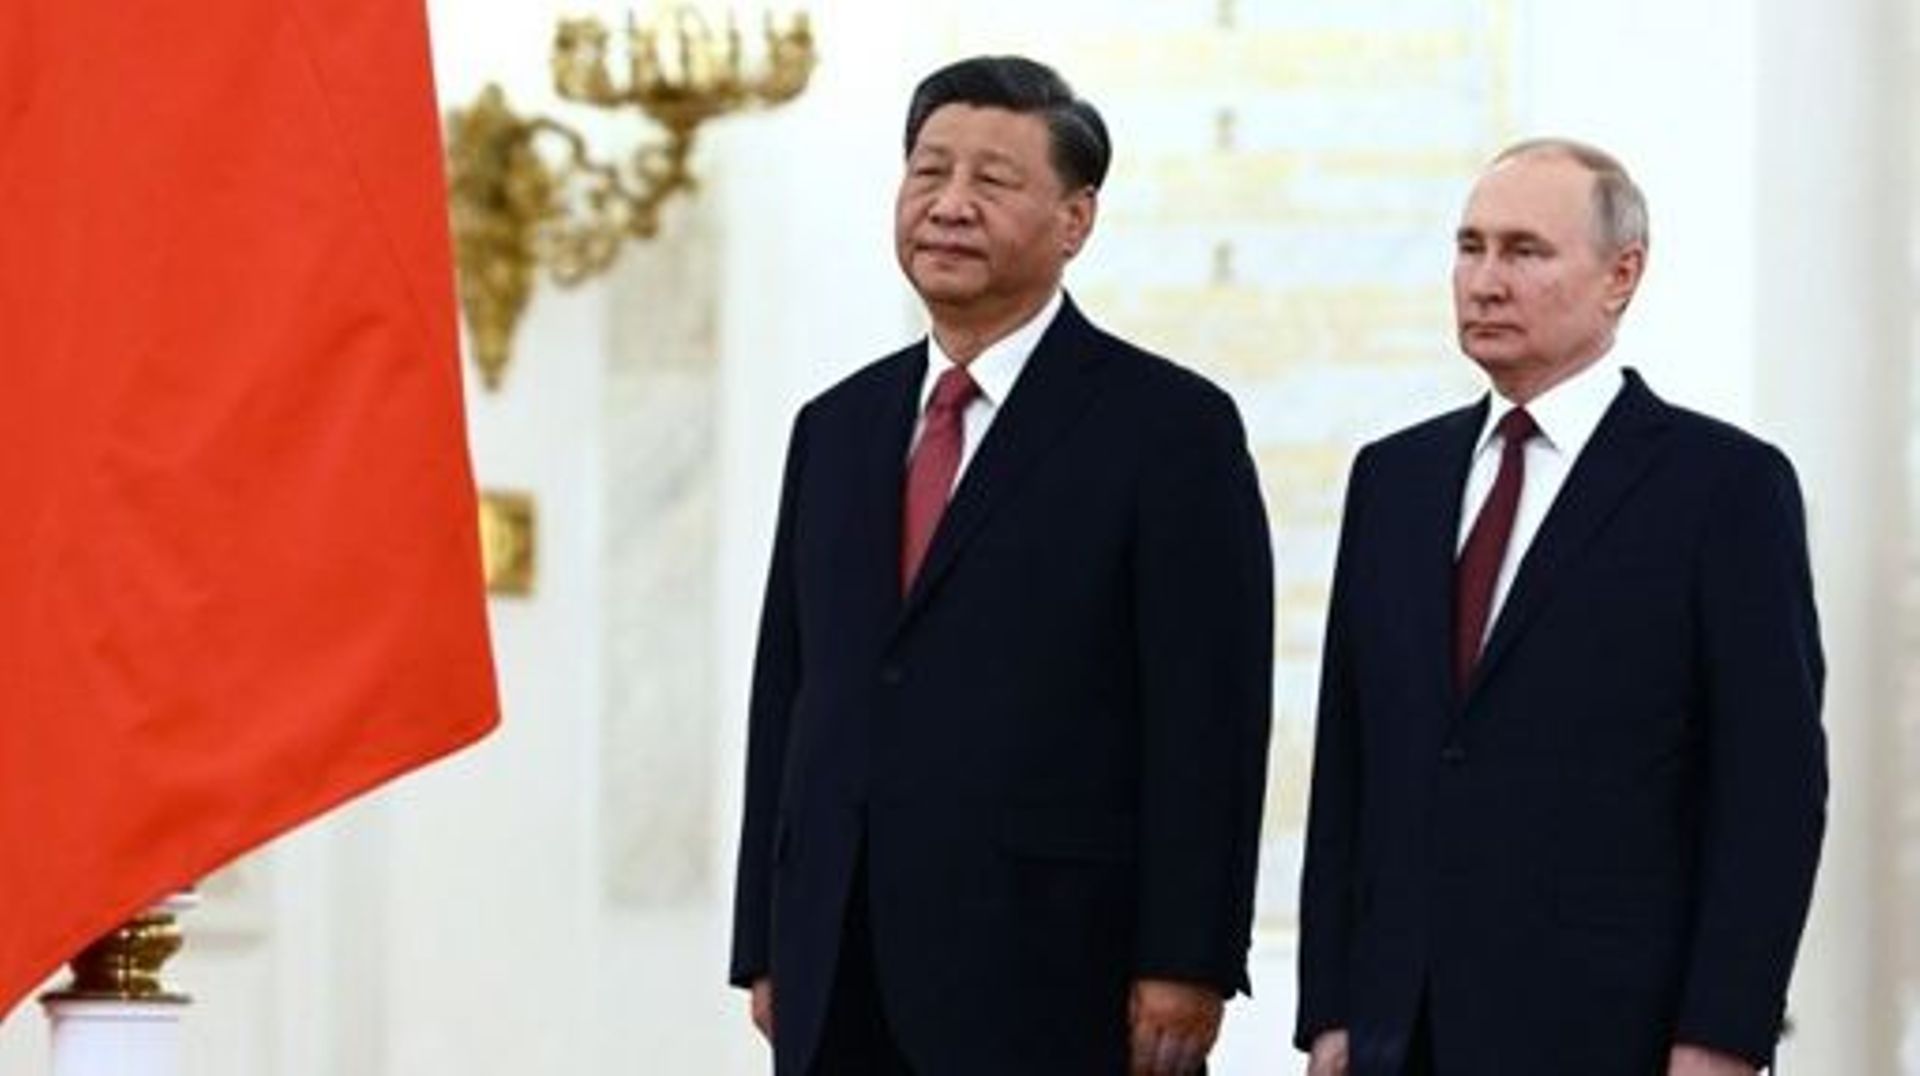 Russian President Vladimir Putin meets with China’s President Xi Jinping at the Kremlin in Moscow on March 21, 2023. Alexey MAISHEV / SPUTNIK / AFP